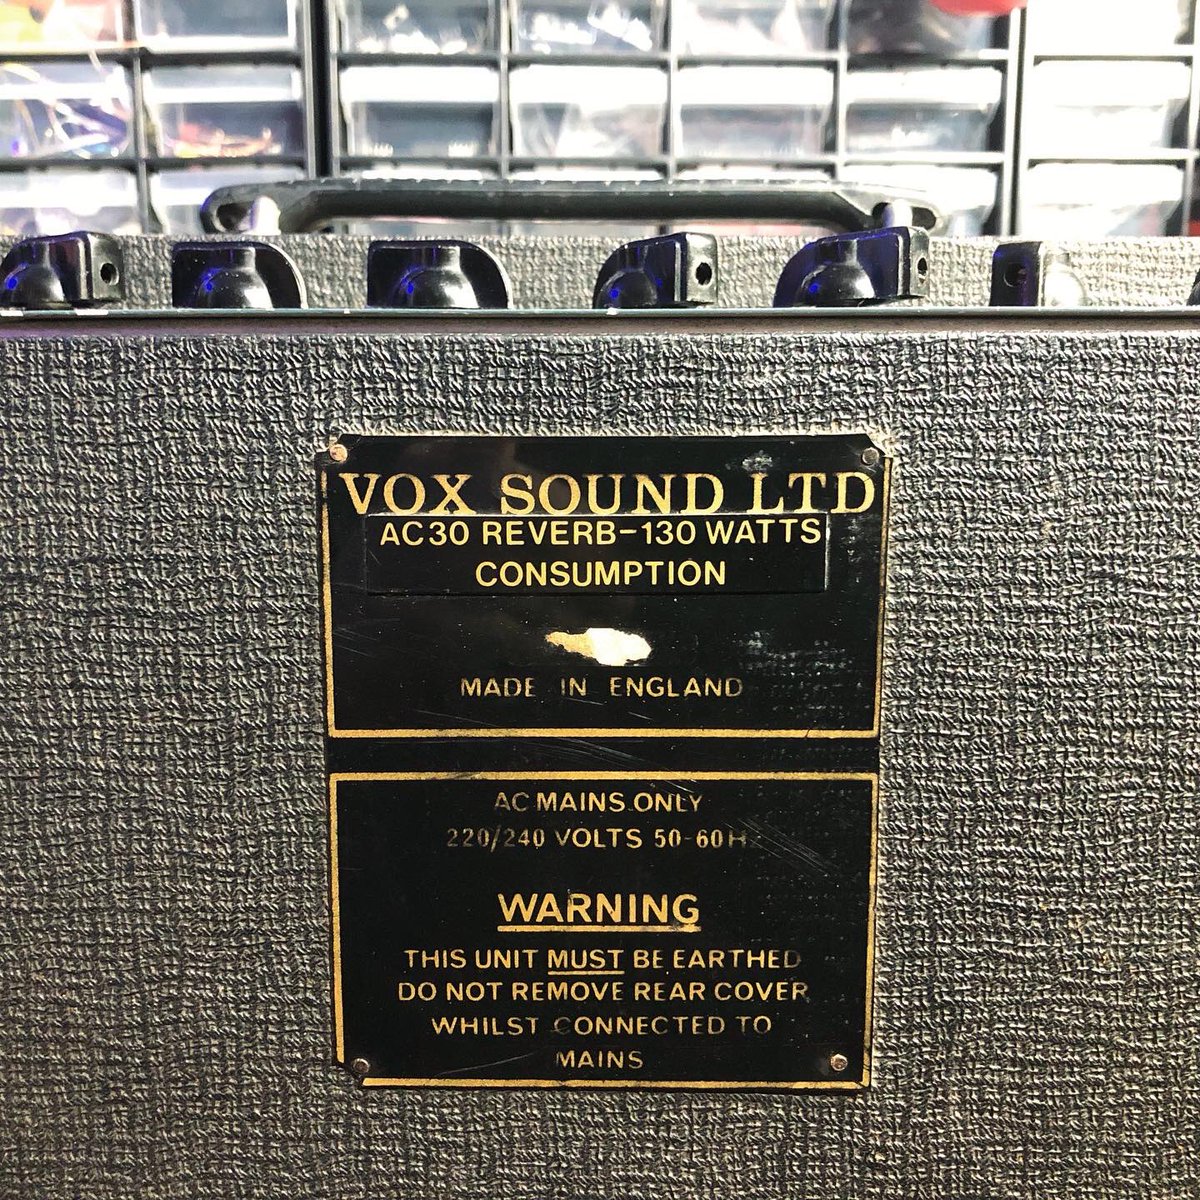 A 1979 #Vox #AC30 from the #RoseMorris era in for strange noise on the output. This 45 year old legend has some of the most beautiful #amplifier construction I’ve seen here. Found a dead #vacuumtube and some other suspect parts. Thanks to The Hooks for leaving it in 📻